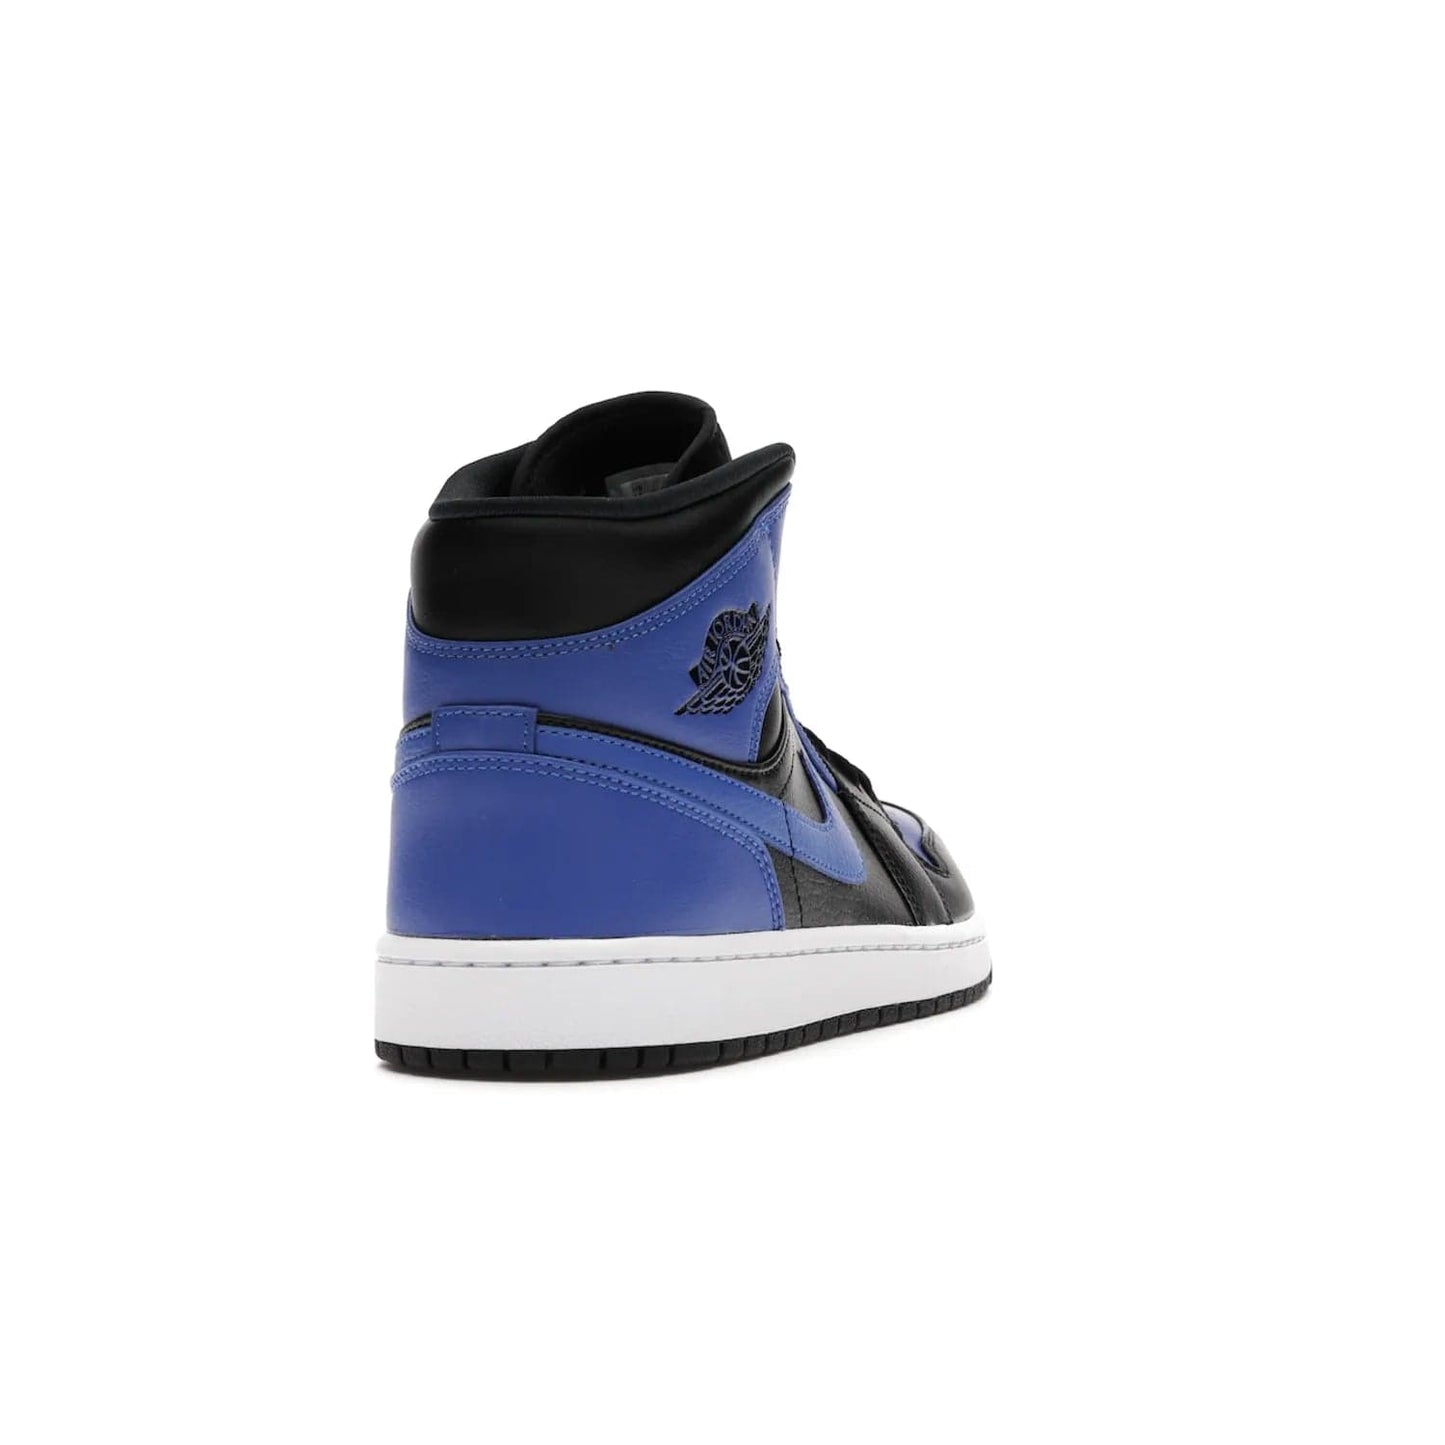 Jordan 1 Mid Hyper Royal Tumbled Leather - Image 30 - Only at www.BallersClubKickz.com - Iconic colorway of the Air Jordan 1 Mid Black Royal Tumbled Leather. Features a black tumbled leather upper, royal blue leather overlays, white midsole & black rubber outsole. Released December 2020. Adds premium style to any collection.